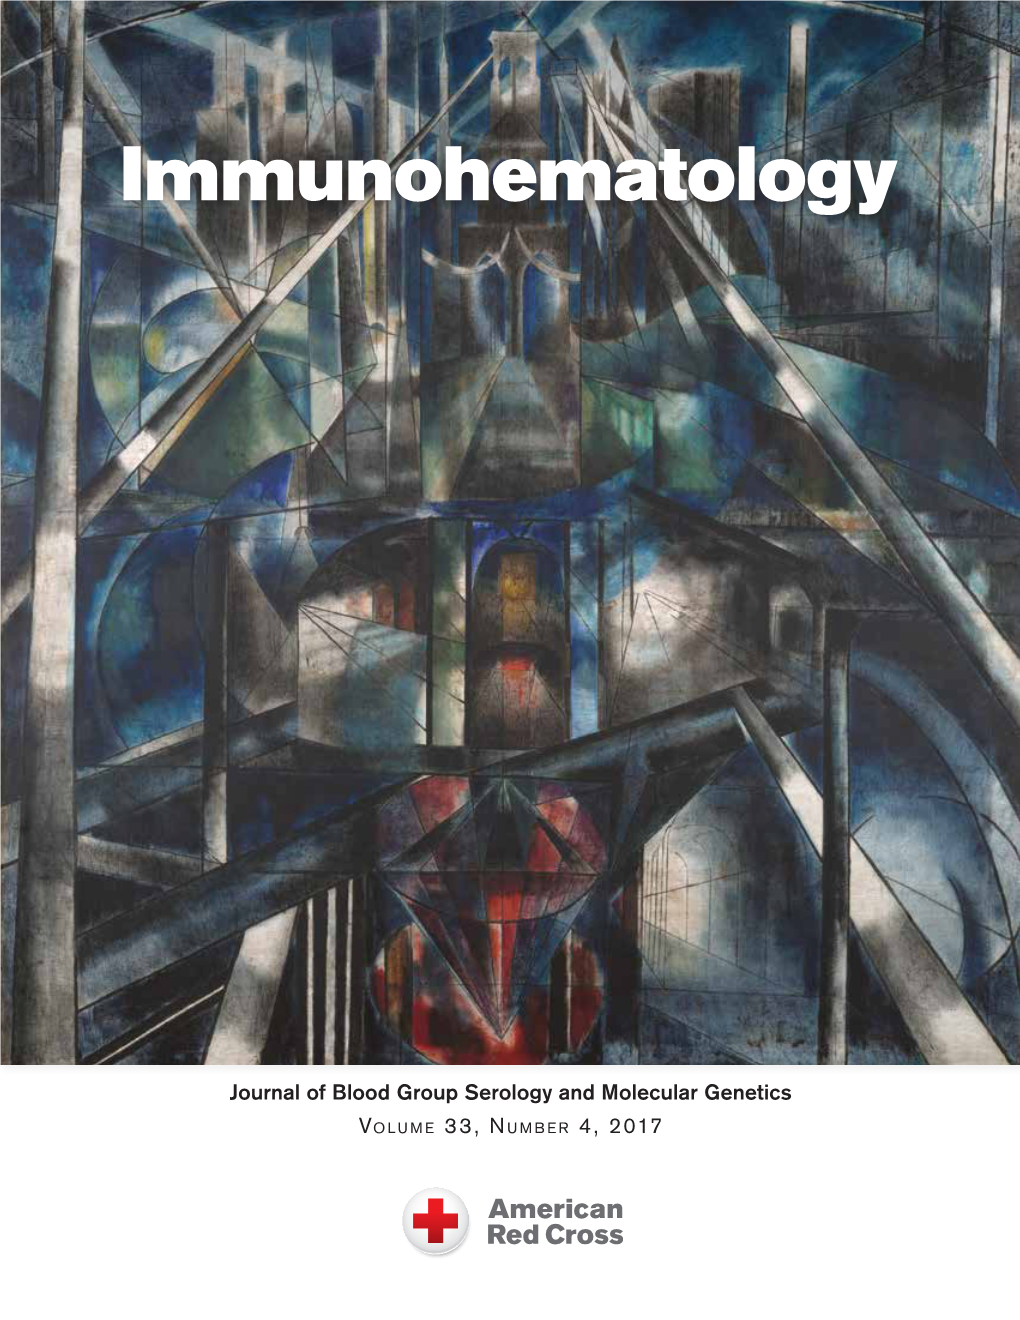 This Issue of Immunohematology Is Supported by a Contribution From